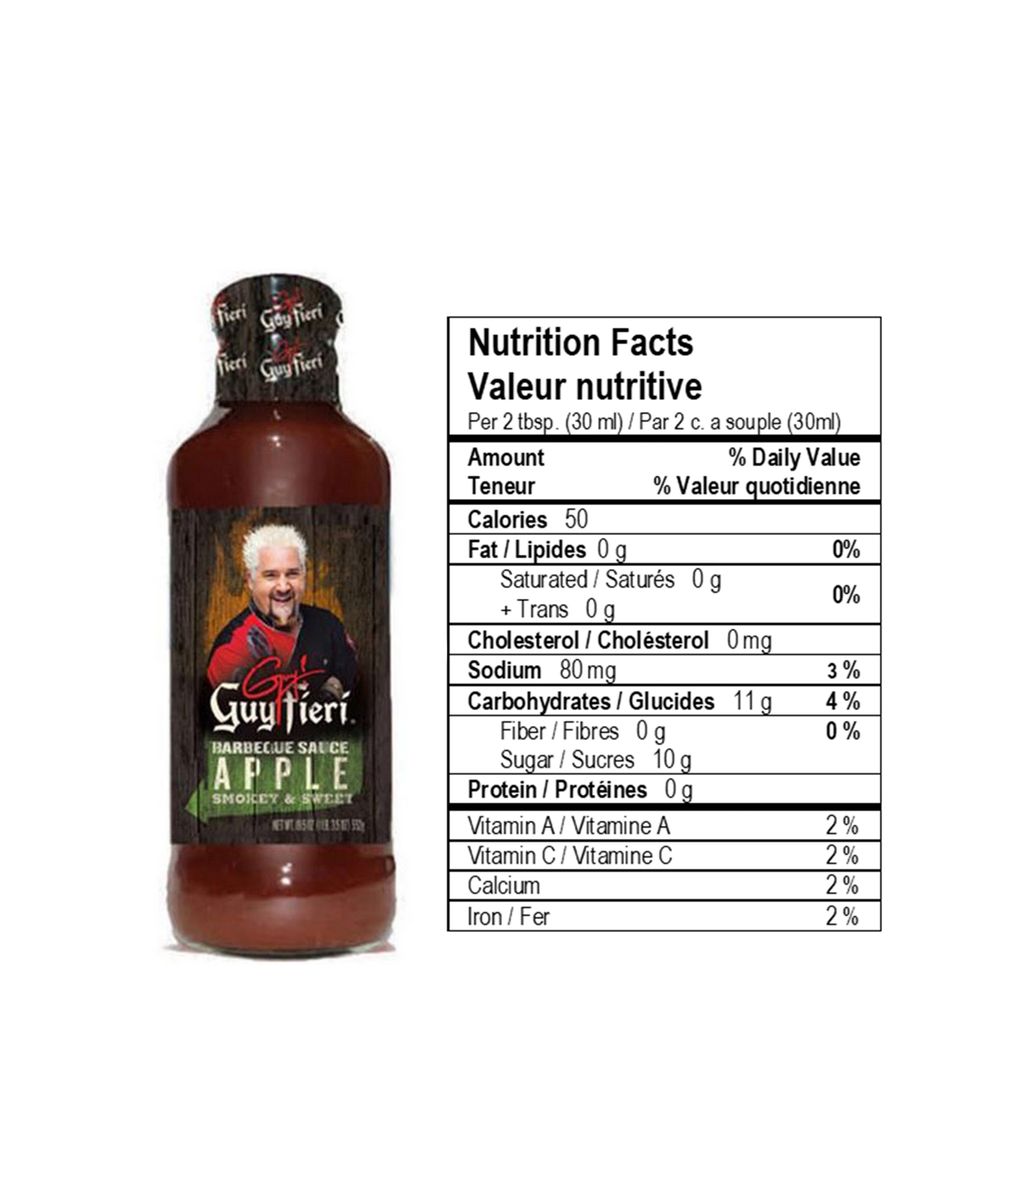 Guy Fieri Smokey & Sweet Apple BBQ Sauce with nutrition facts